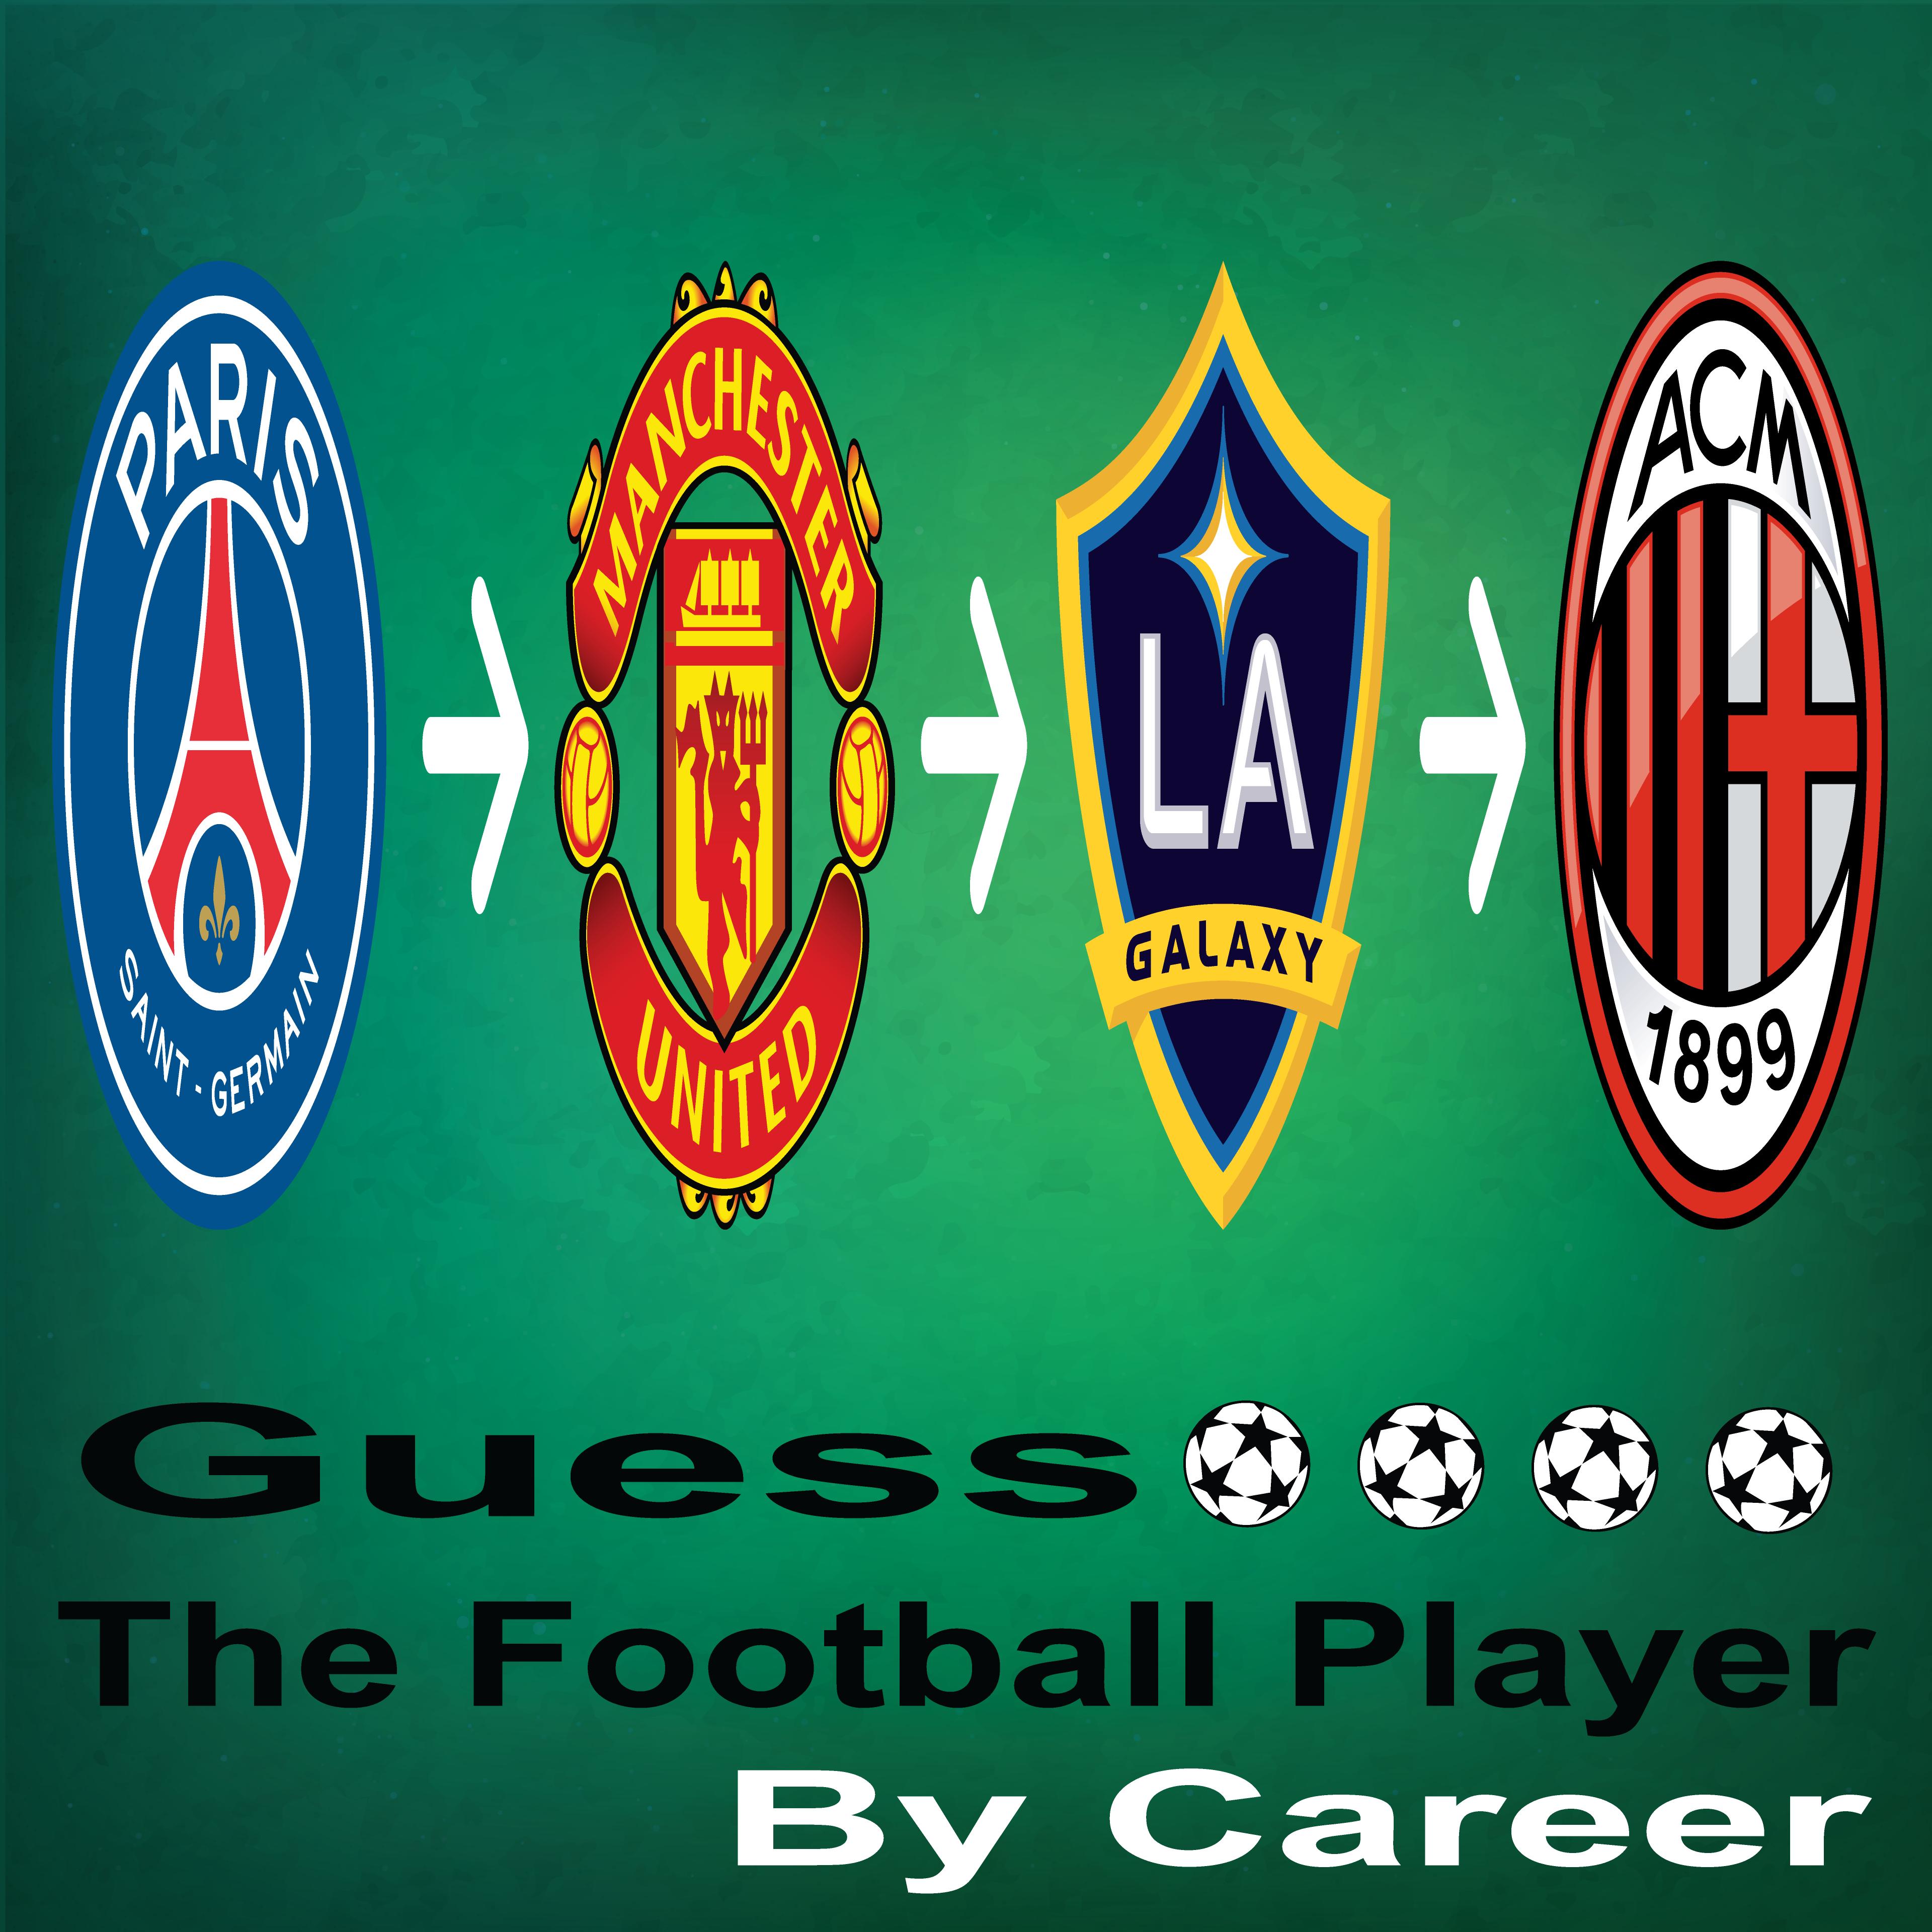 Guess The Football Player By Career Transfer 2020 for Android - APK Download